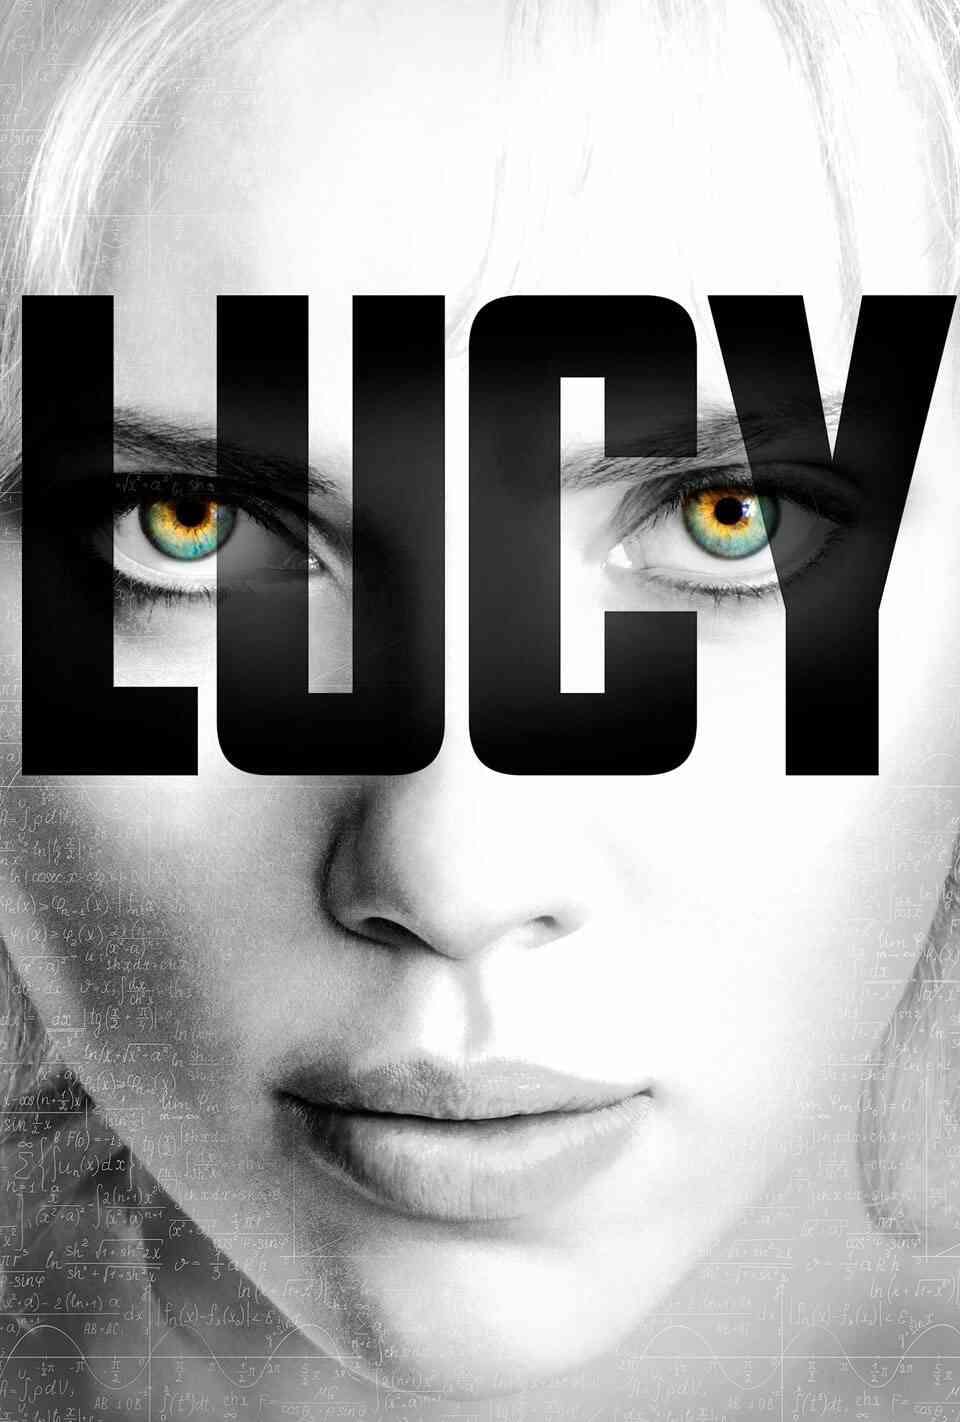 Read Lucy screenplay.